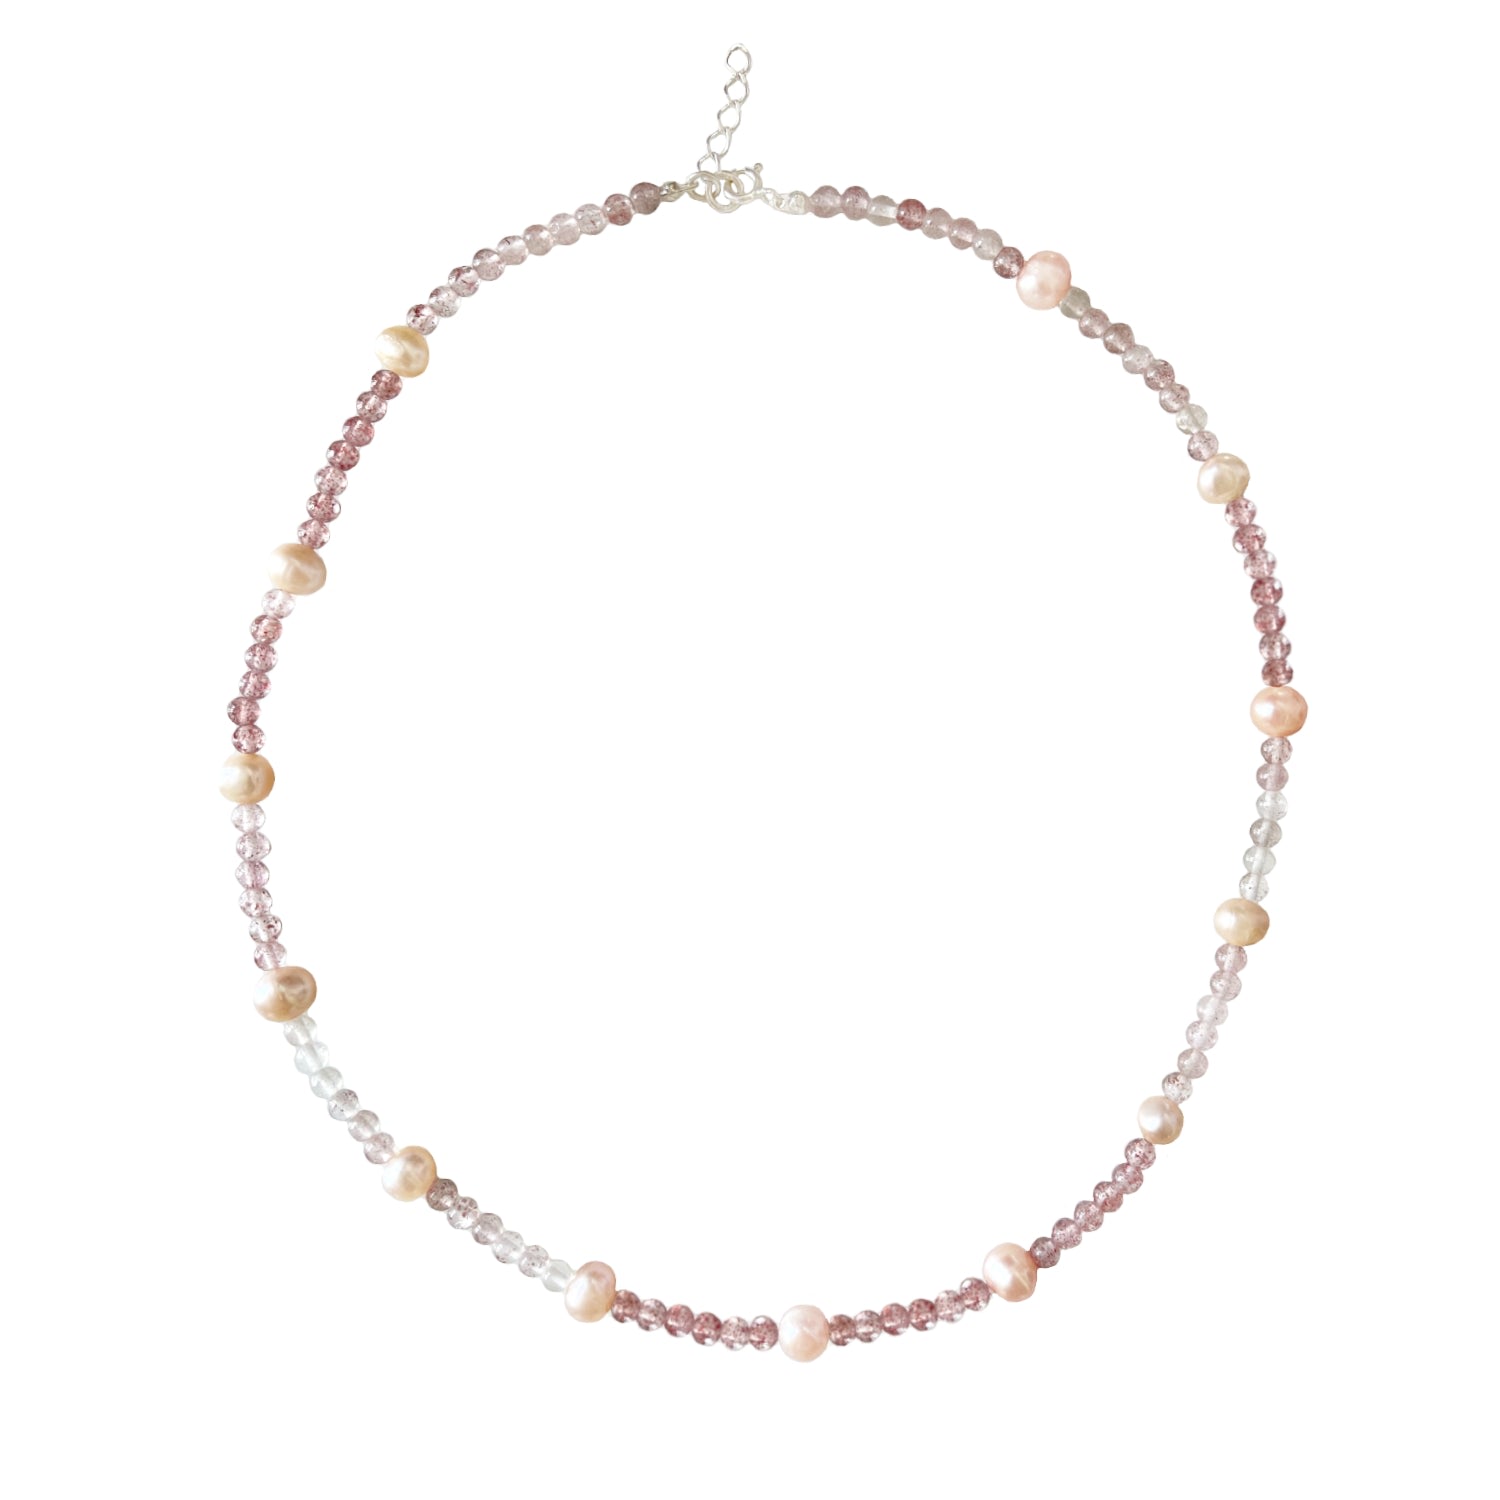 Néo Parisian Women's Pink / Purple / White Pink Pearl Necklace With Strawberry Quartz Beads In Burgundy